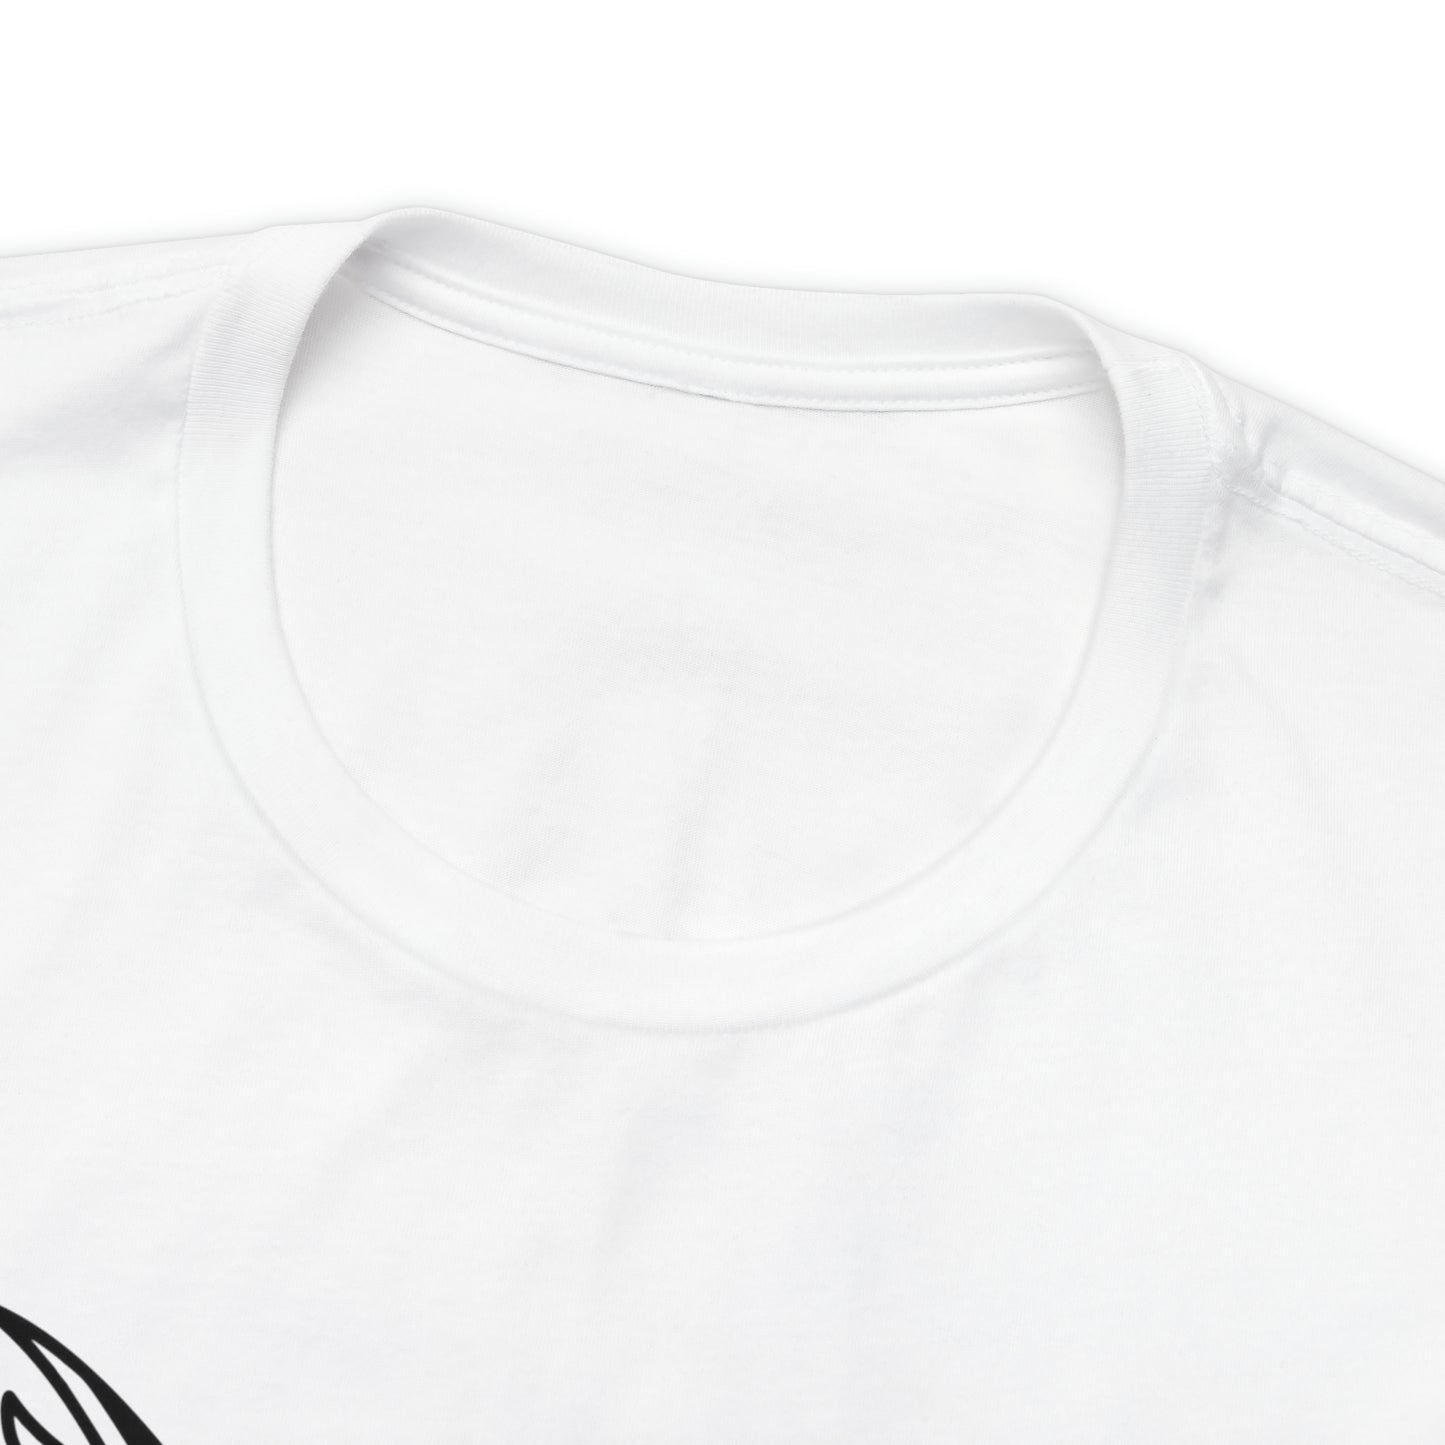 White T-shirt with wolf print on the front. Detail of the neck